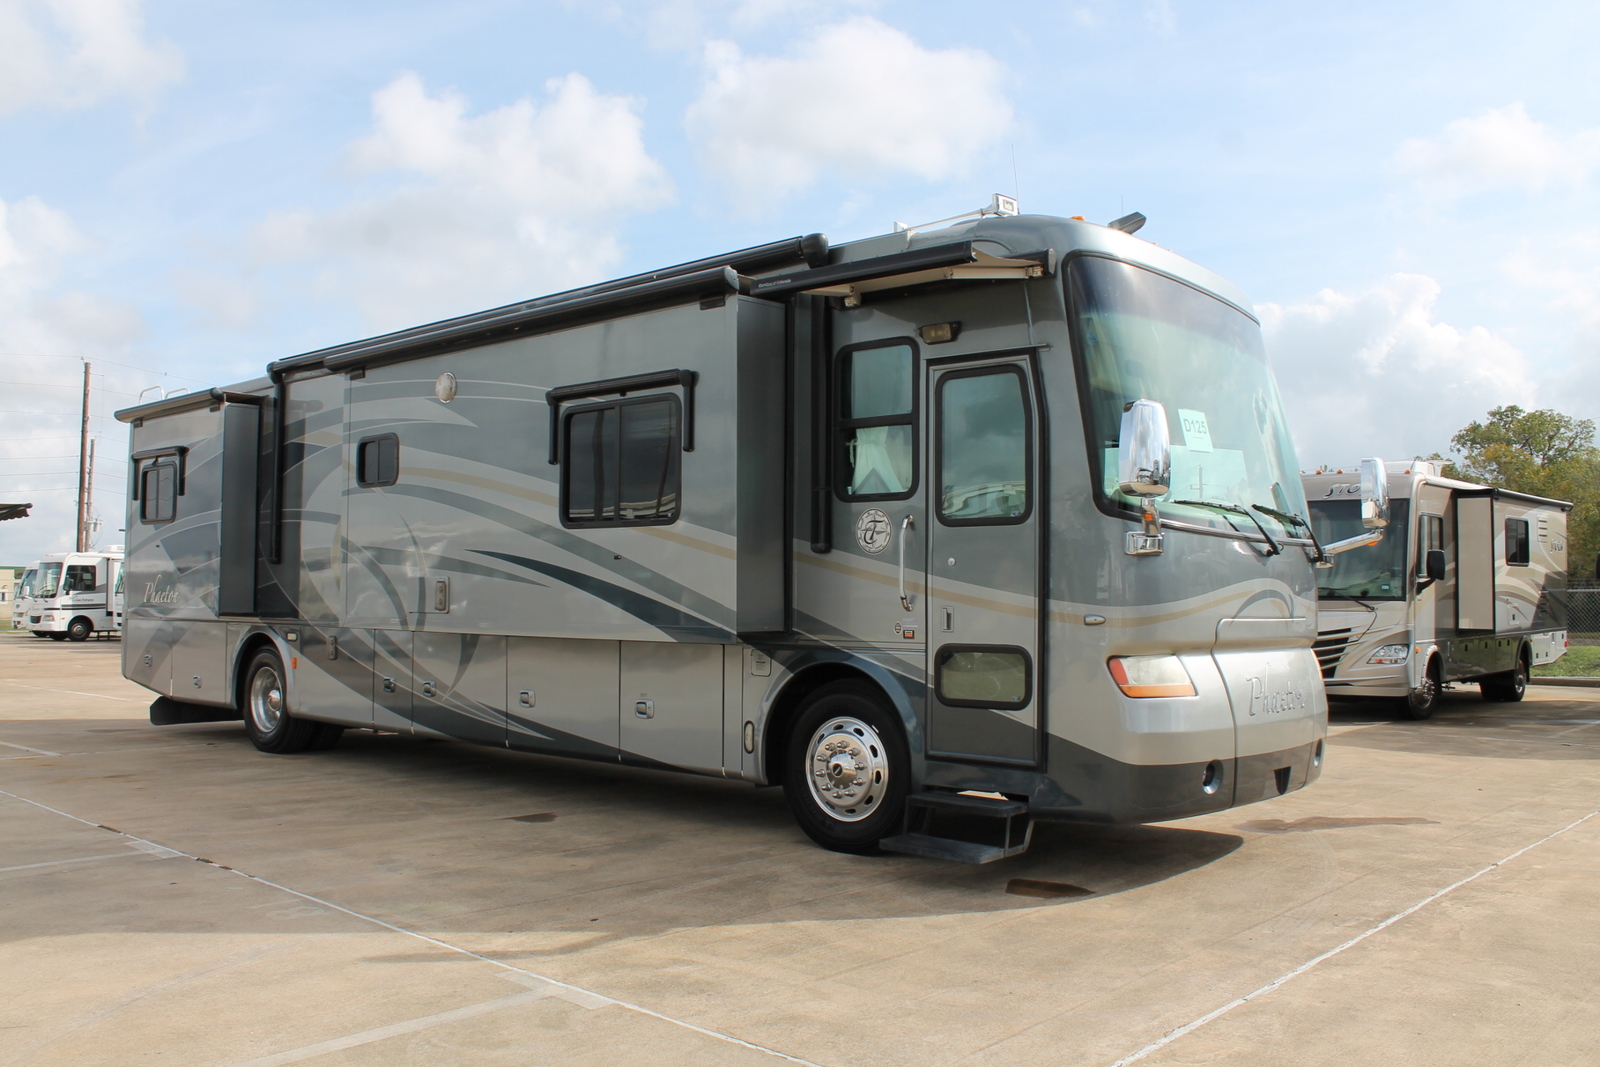 Photo of Inspected Tiffin Phaeton Motorhome for which RV Inspector Pro was Reviewed